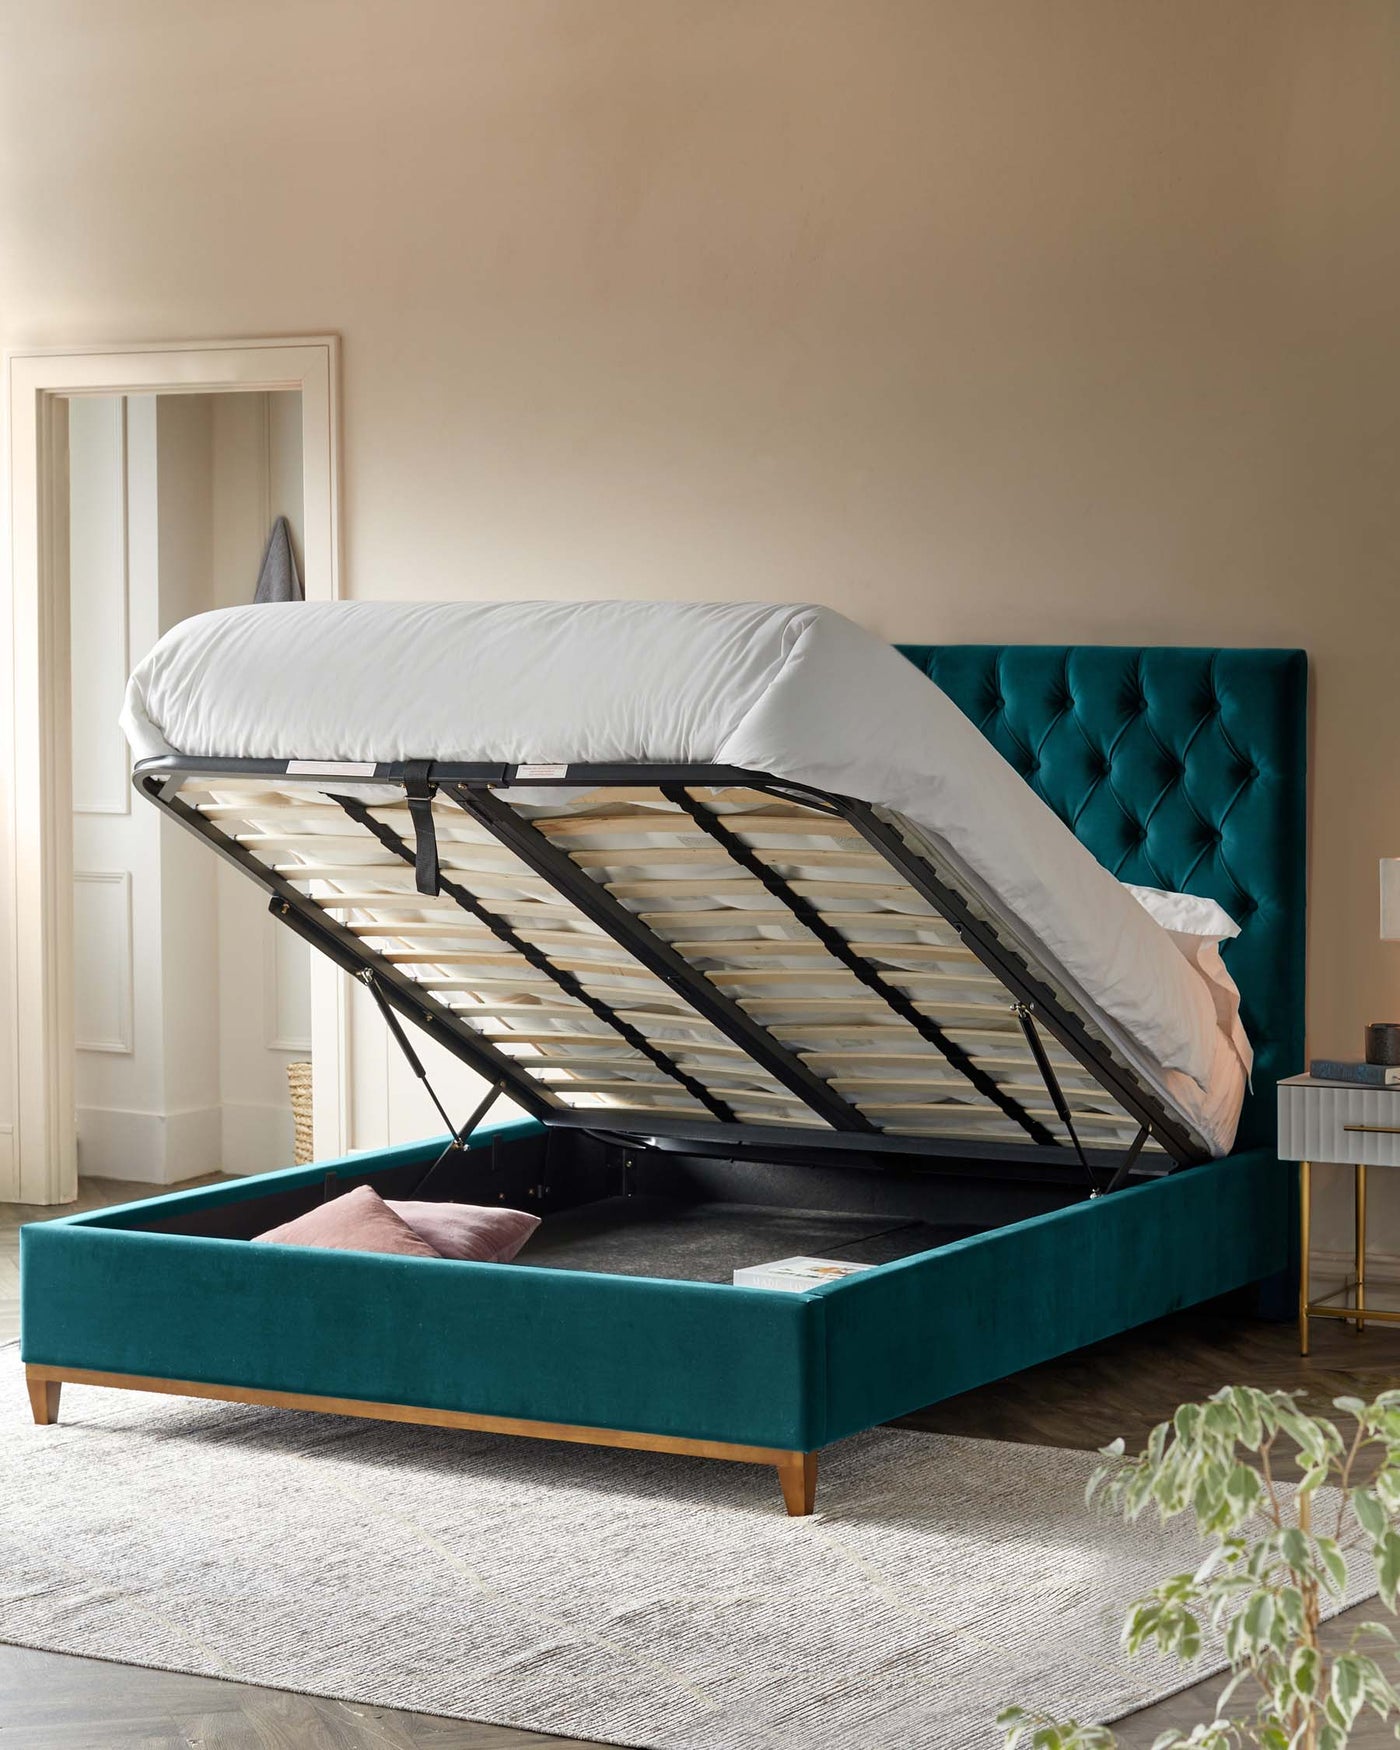 A luxurious teal upholstered storage bed with a lifted mattress platform revealing a spacious under-bed storage area. The bed features a tufted headboard and a wooden footing element.